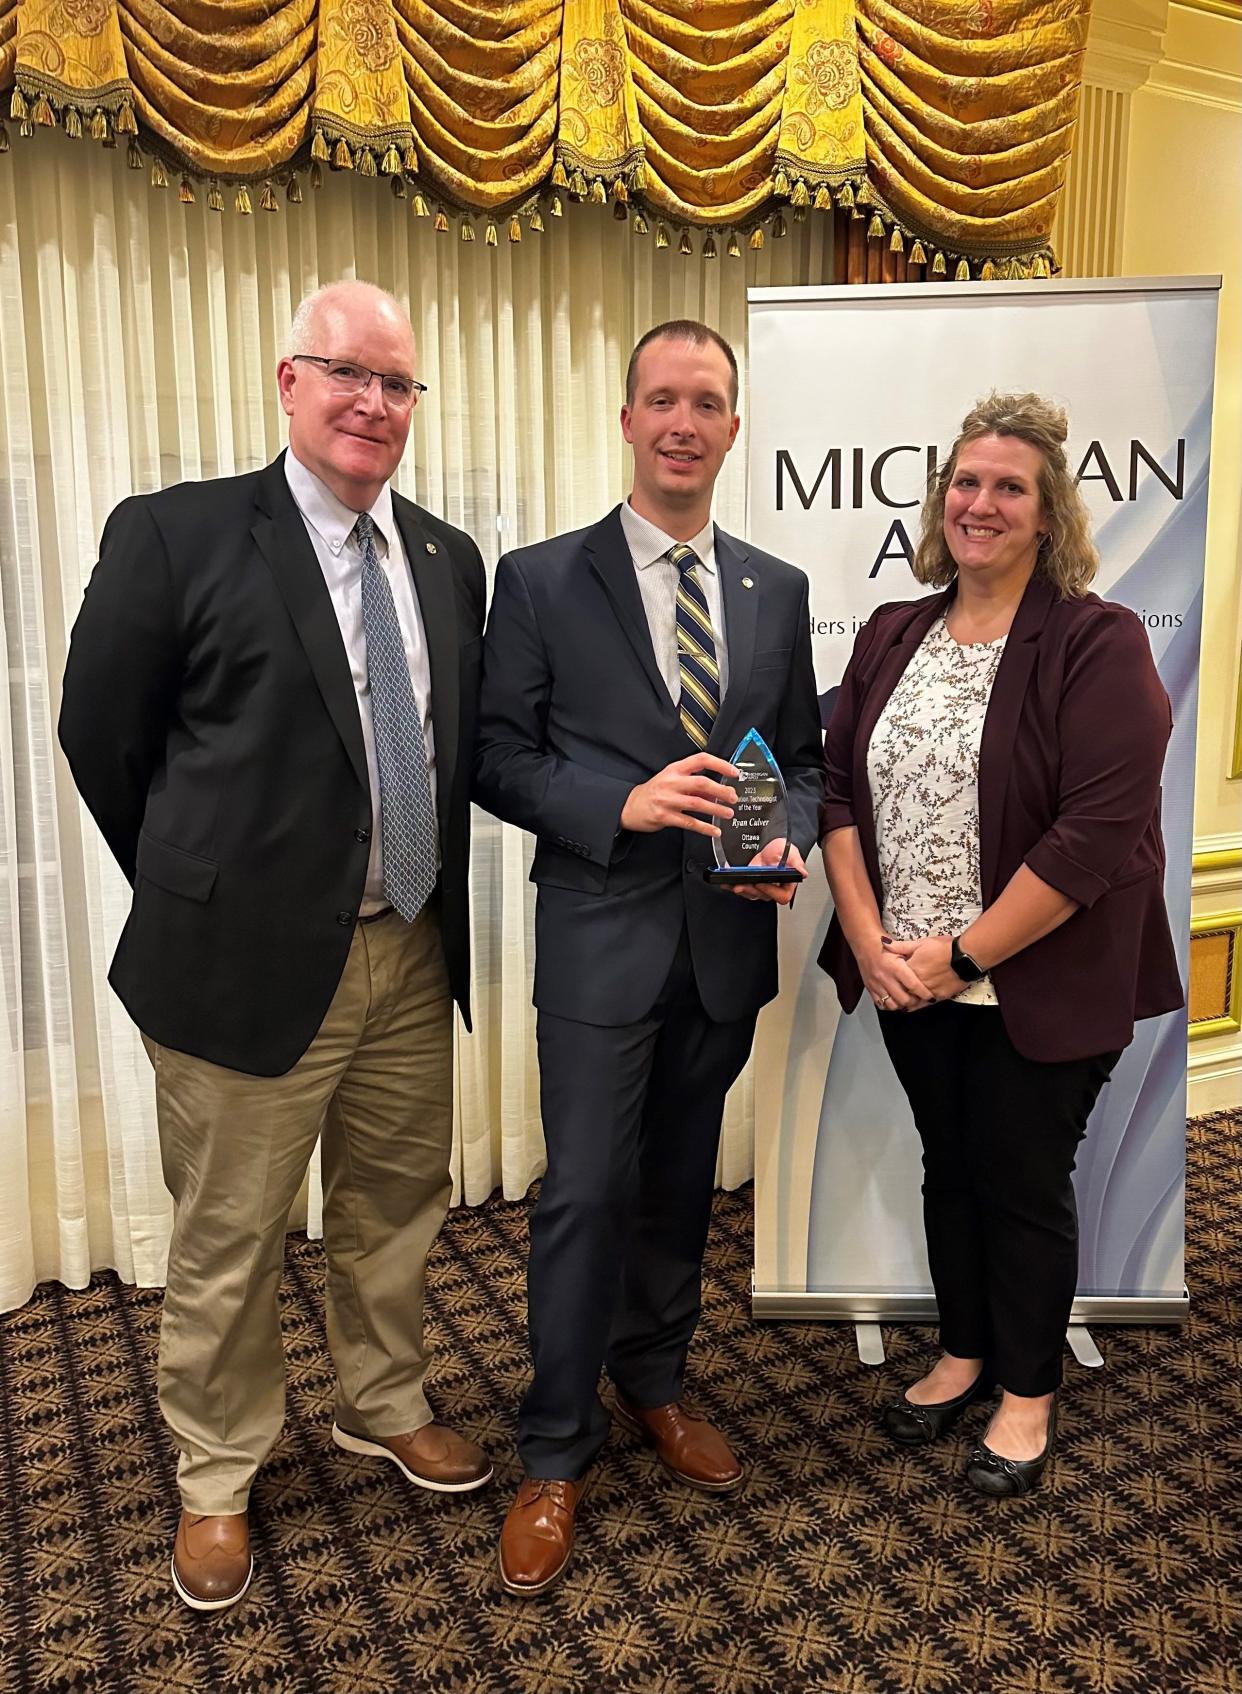 OCCDA Executive Director Pete McWatters (left) with Ryan Culver and Deputy Director Tammy Smith at the Michigan APCO Annual Meeting.